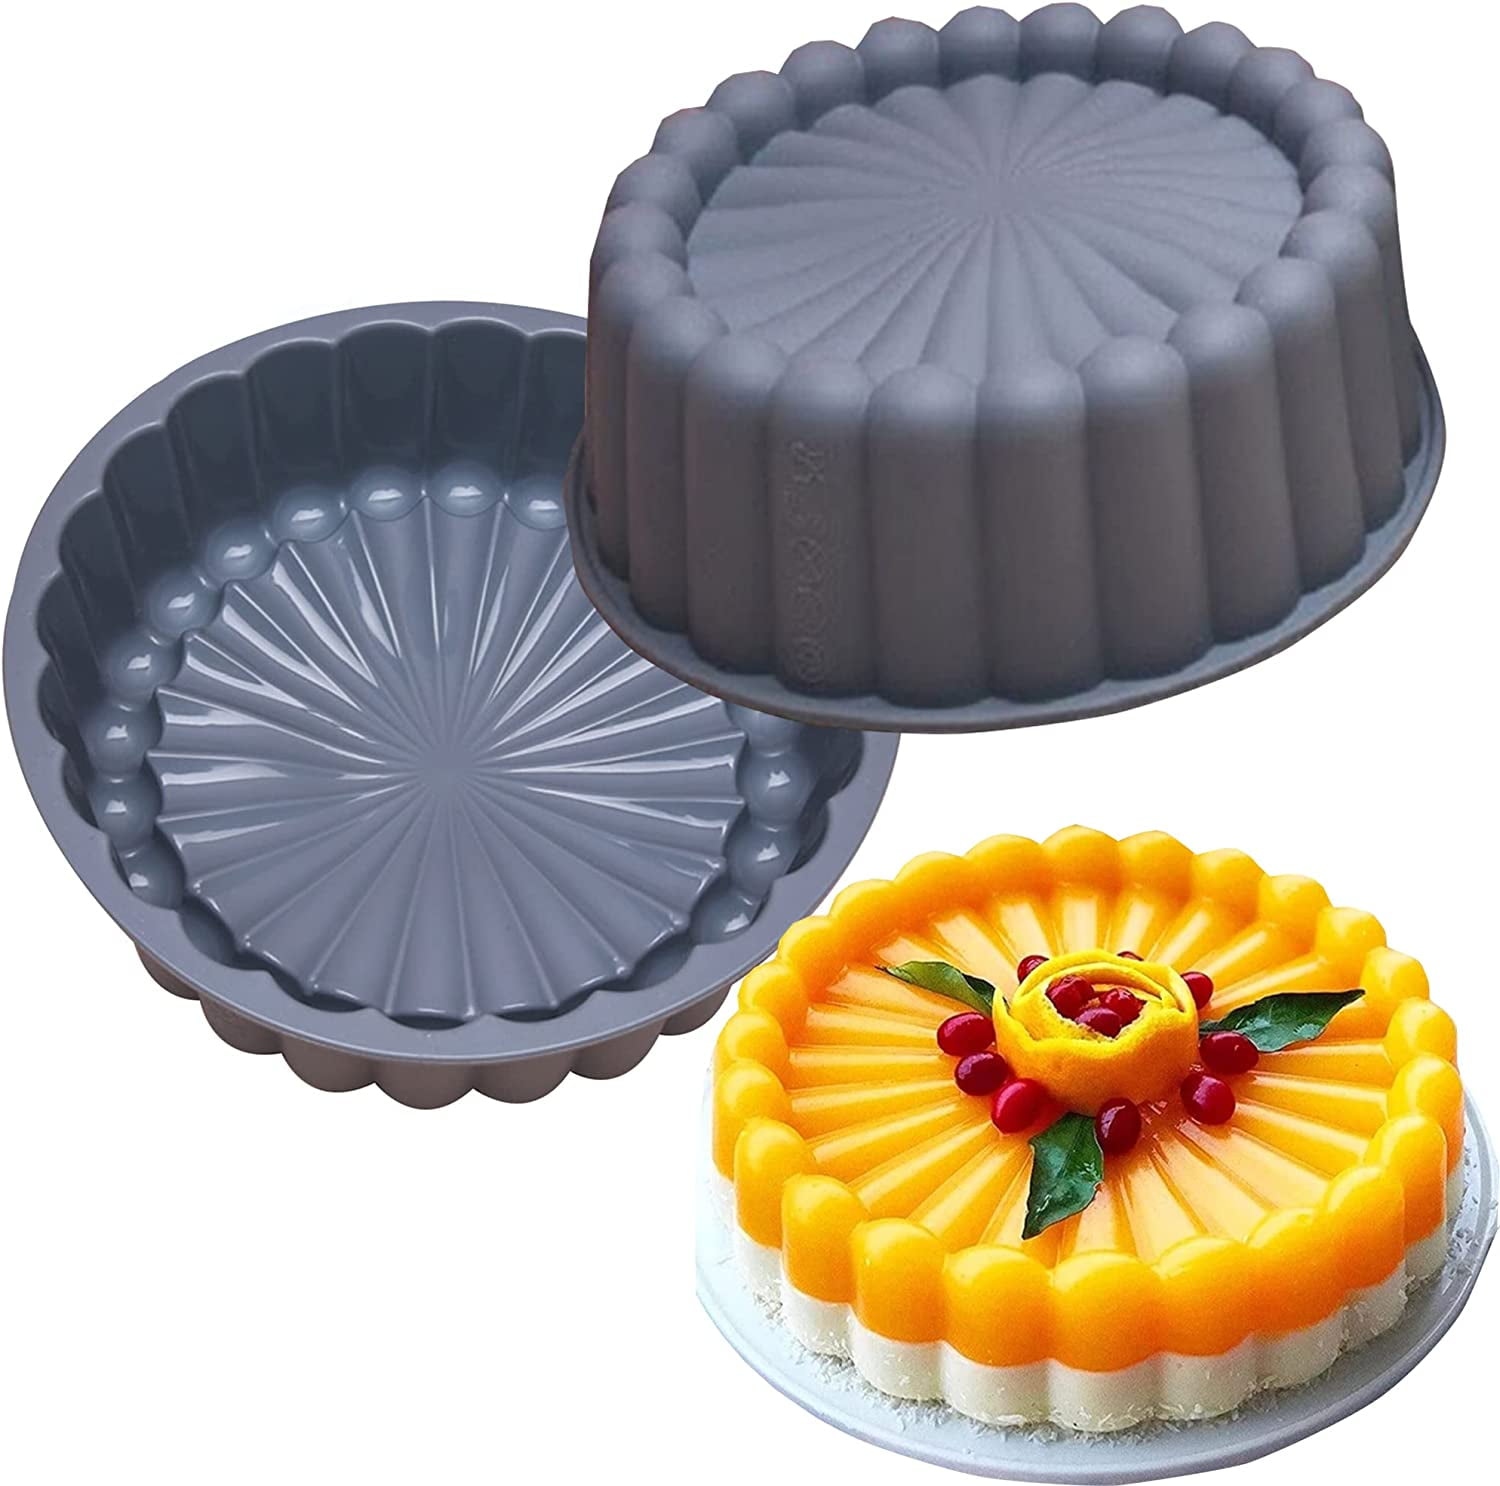 Zukuco 8 inch Round Cake Pans, Silicone Molds for Baking, Nonstick